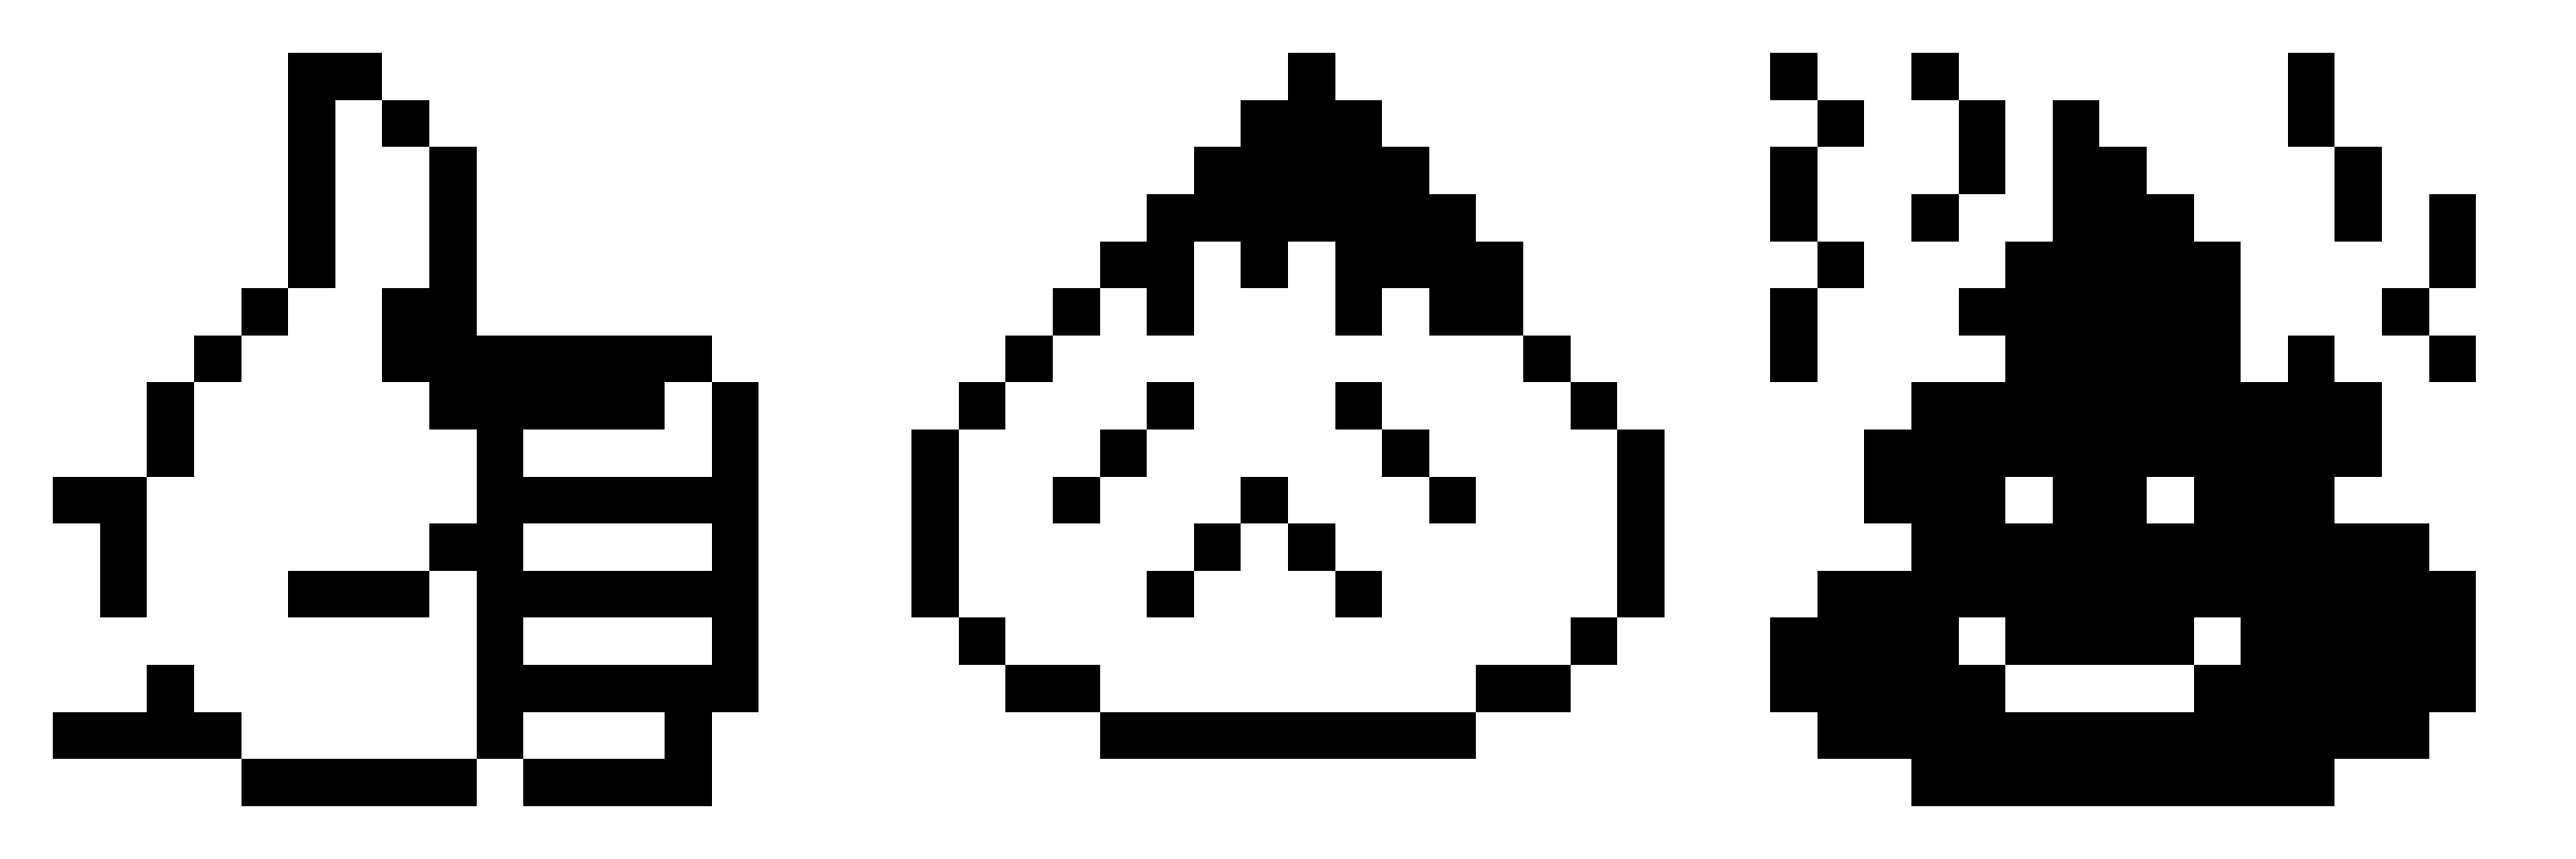 Three black-and-white pixelated emoji from the original 1997 SoftBank set. From left-to-right they are a thumbs-up, a disappointed face and a smiling poo.